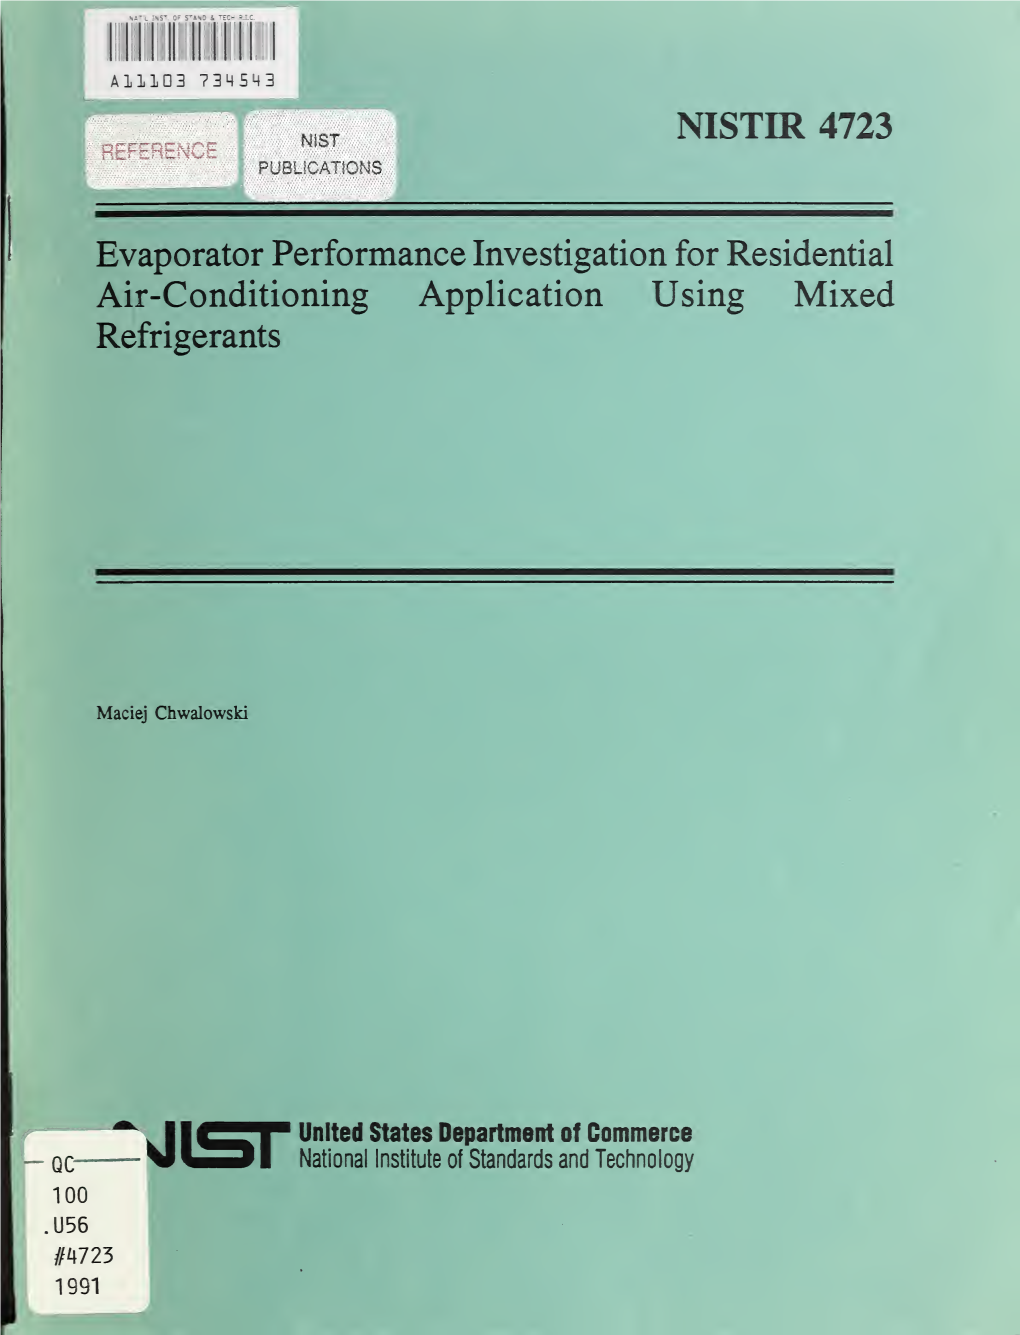 Evaporator Performance Investigation for Residential Air-Conditioning Application Using Mixed Refrigerants